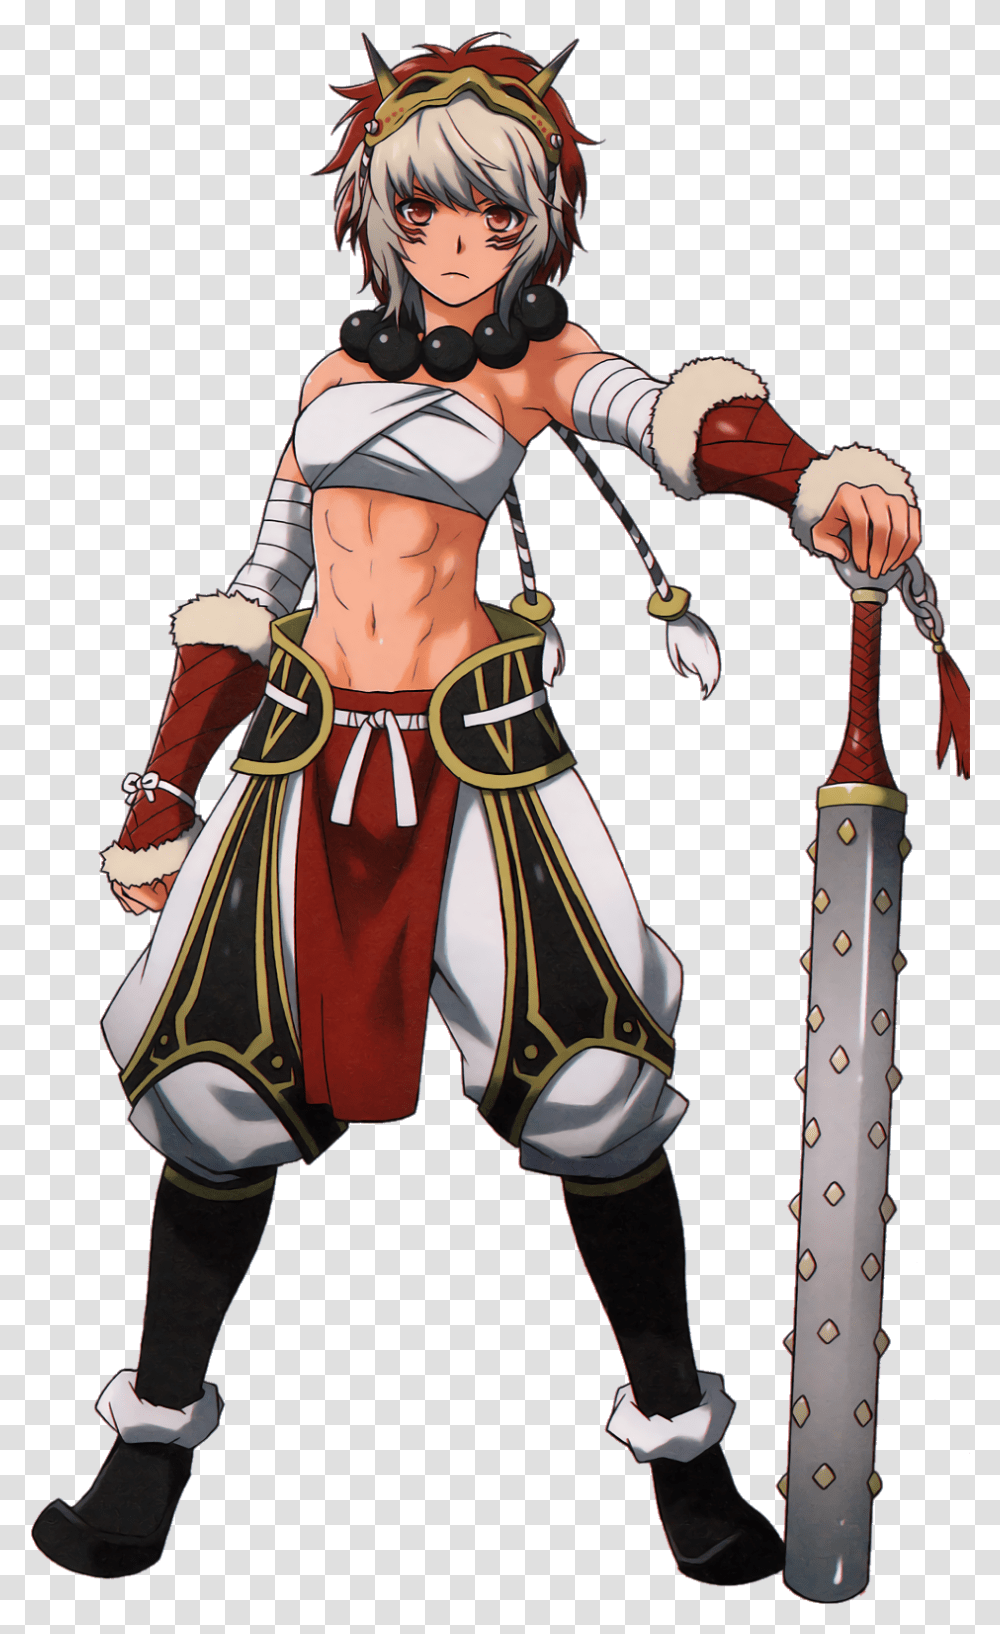 Download Hd Invasion Clipart Barbarian Tribe Rinkah Fire Fire Emblem Fates Rinkah, Person, Costume, Ninja, Clothing Transparent Png